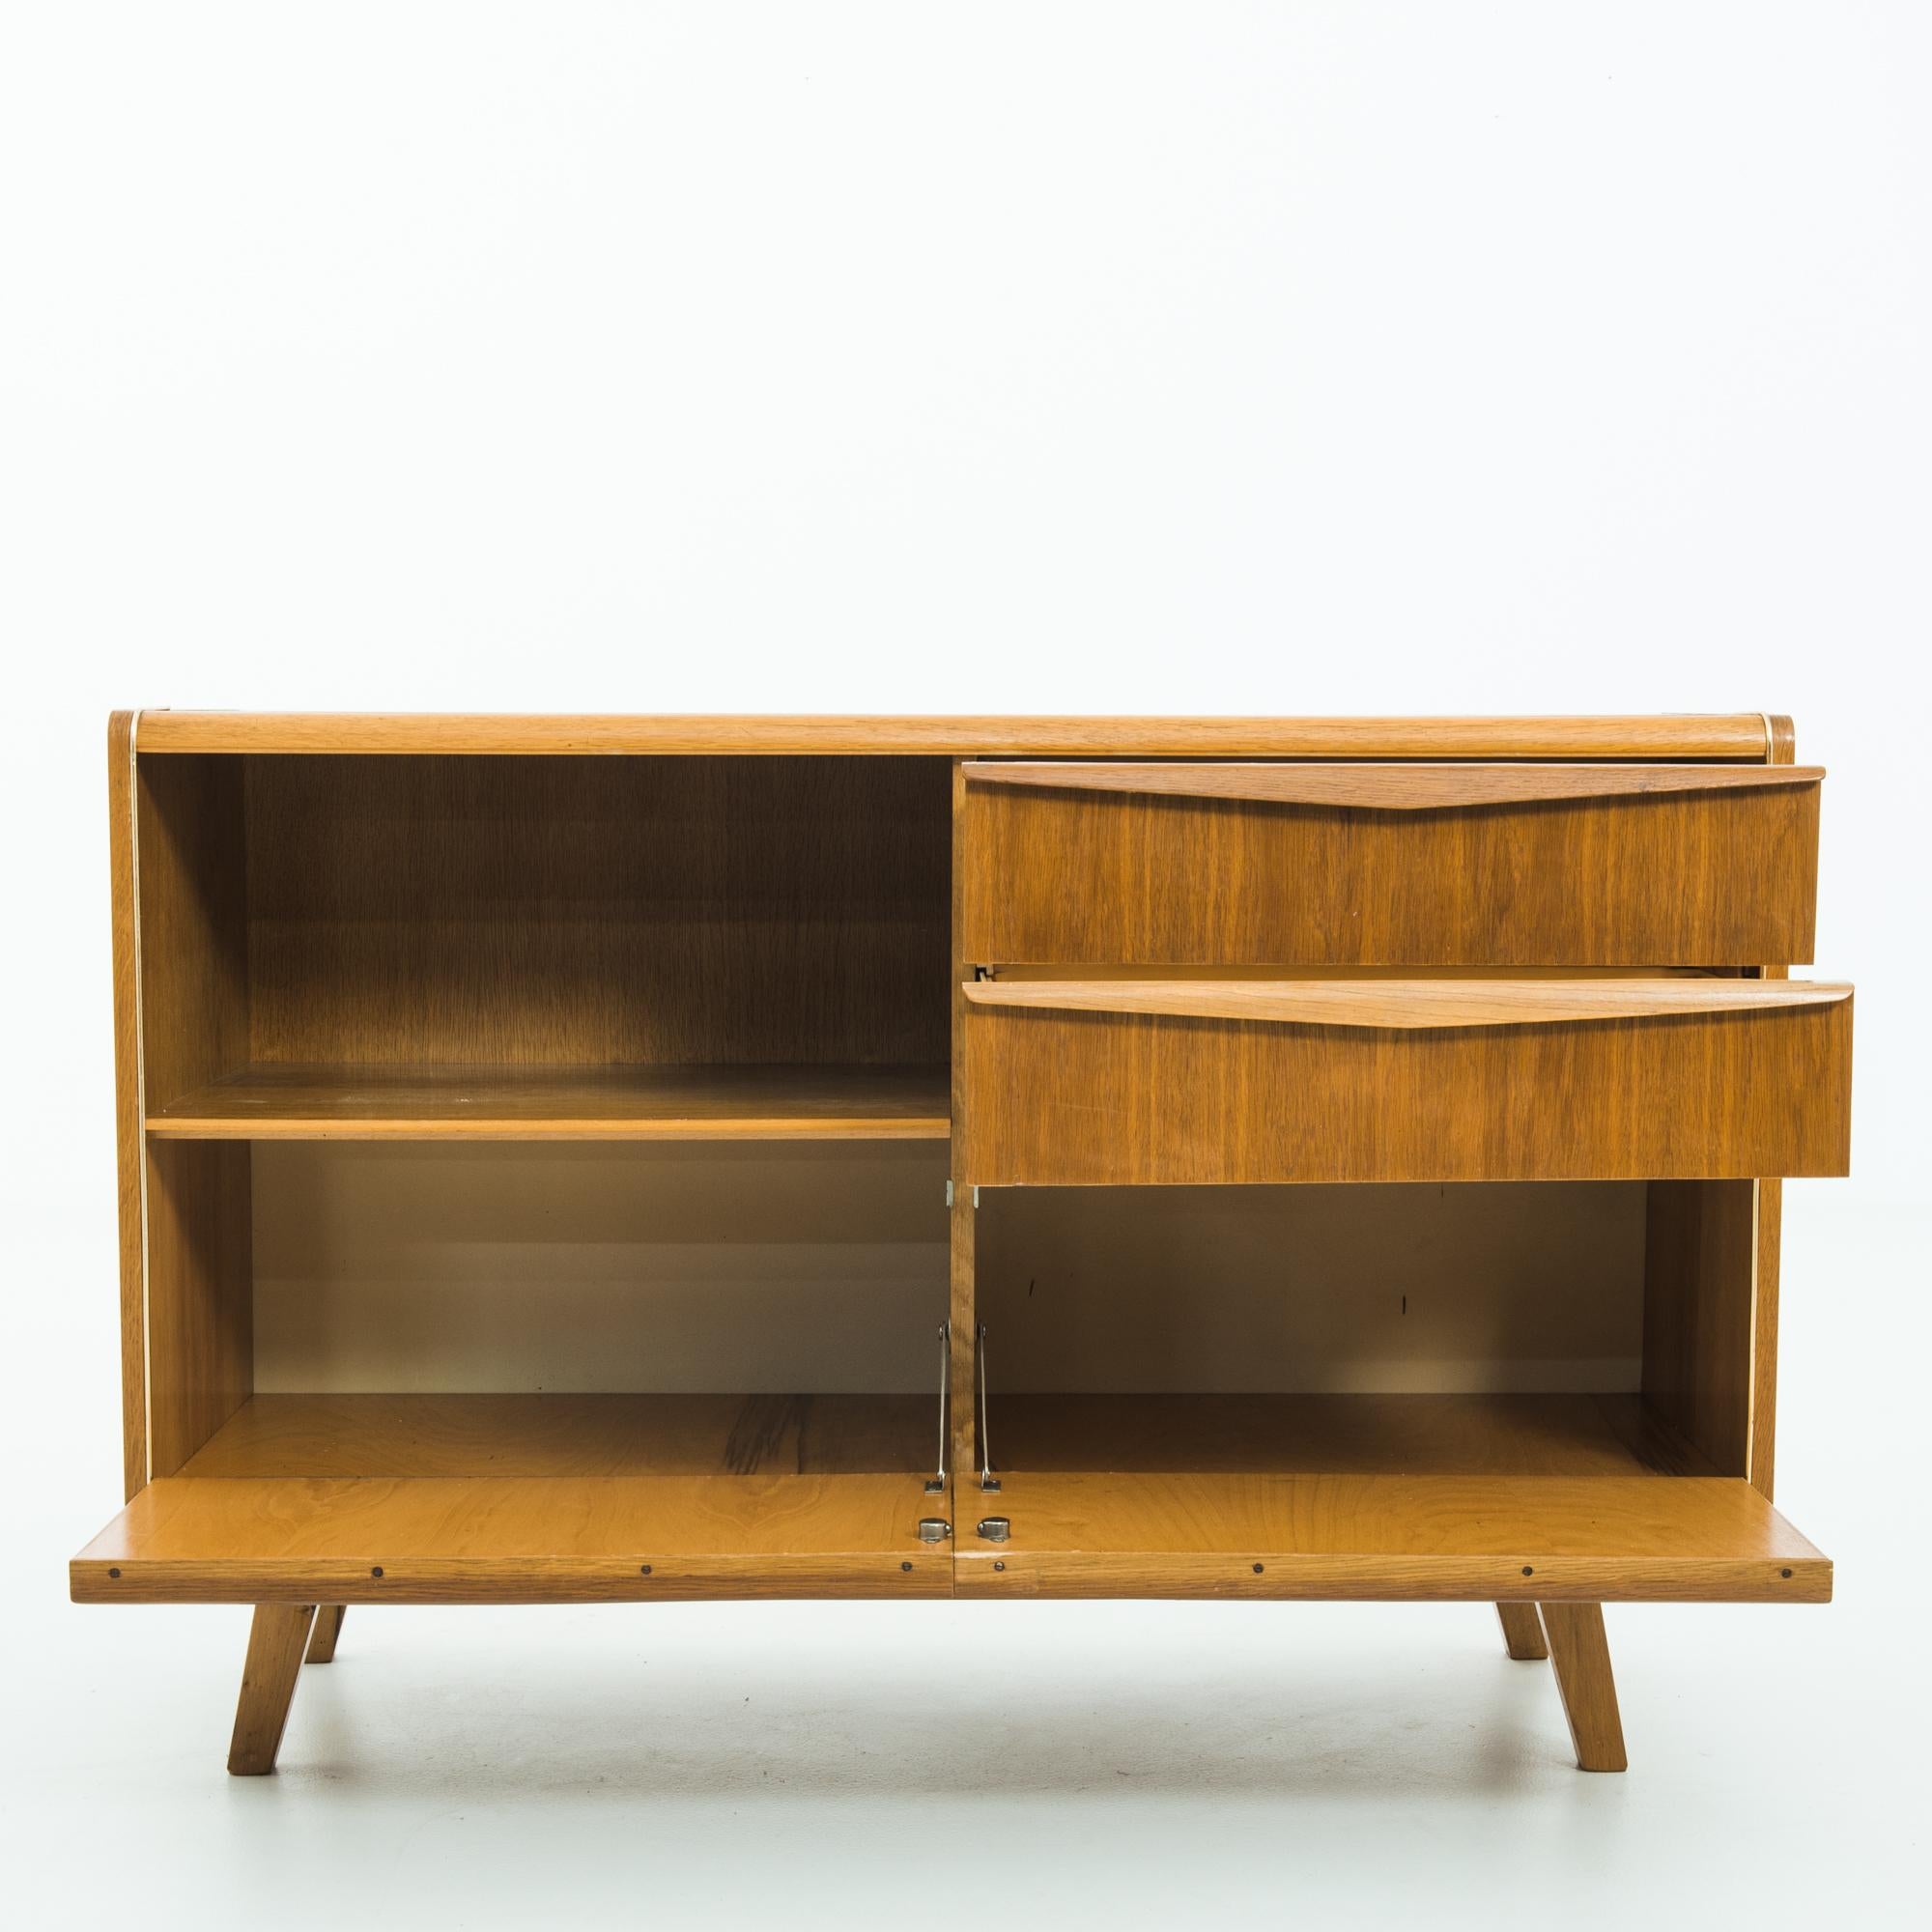 Thoughtfully crafted during the vibrant era of the 1960s in Czechia, this wooden sideboard epitomizes the fusion of sleek modern design and traditional craftsmanship. Constructed from high-quality wood, likely oak or beech, this sideboard showcases